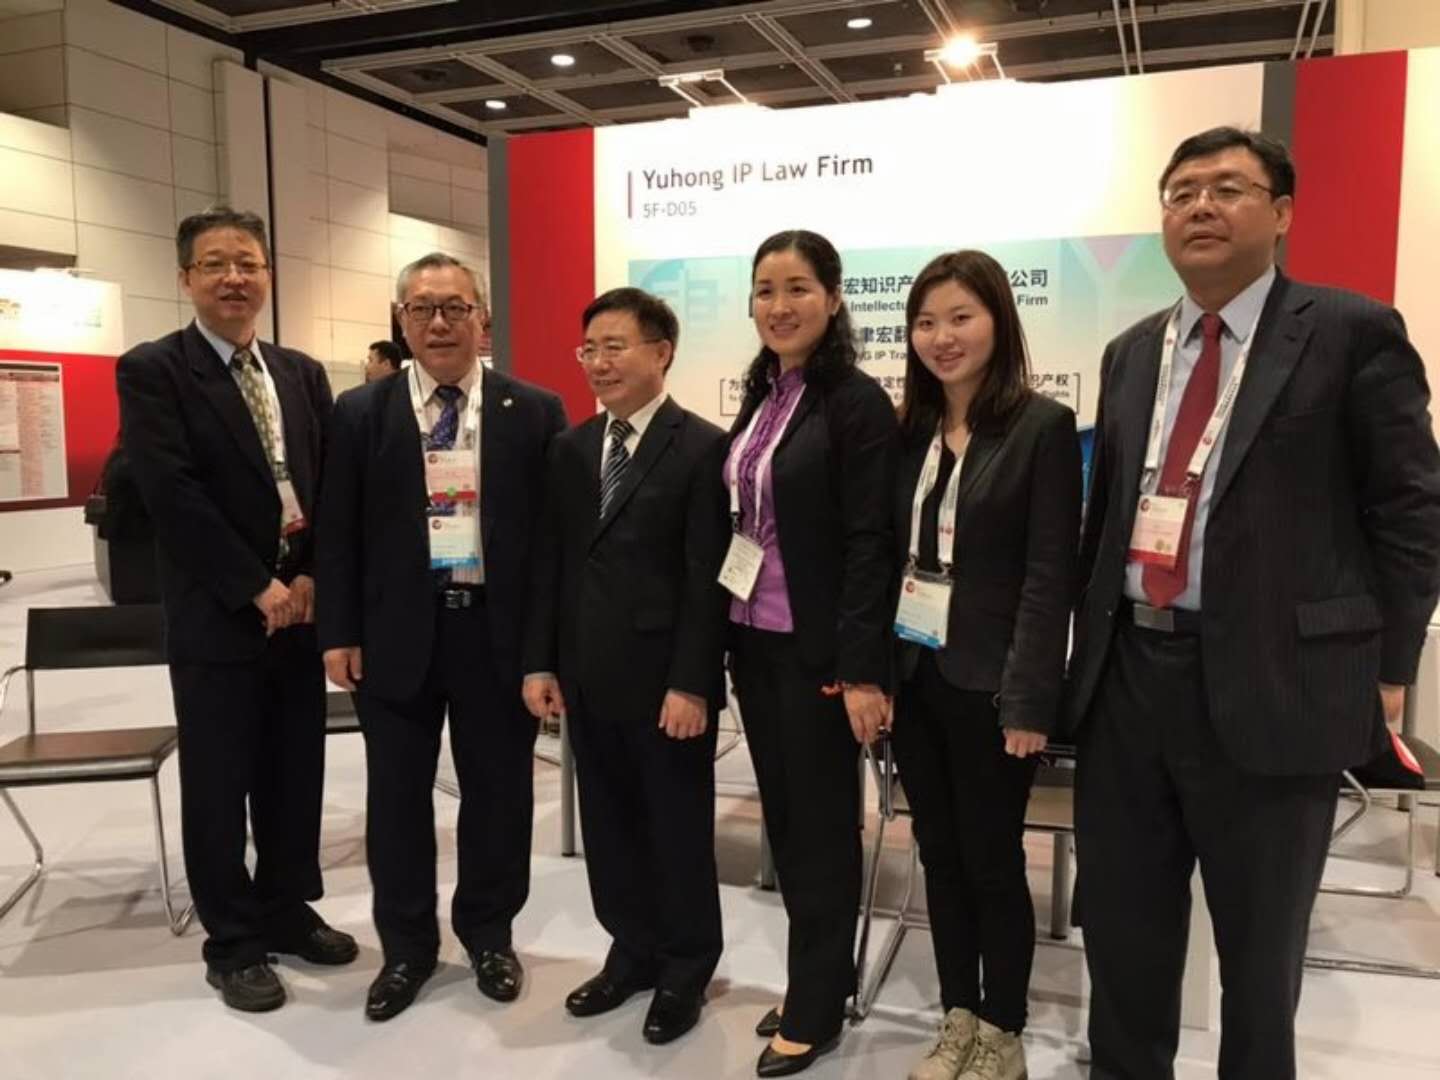 Beijing YUHONG Intellectual Property Law Firm participated in BIP Asia as a sponsor